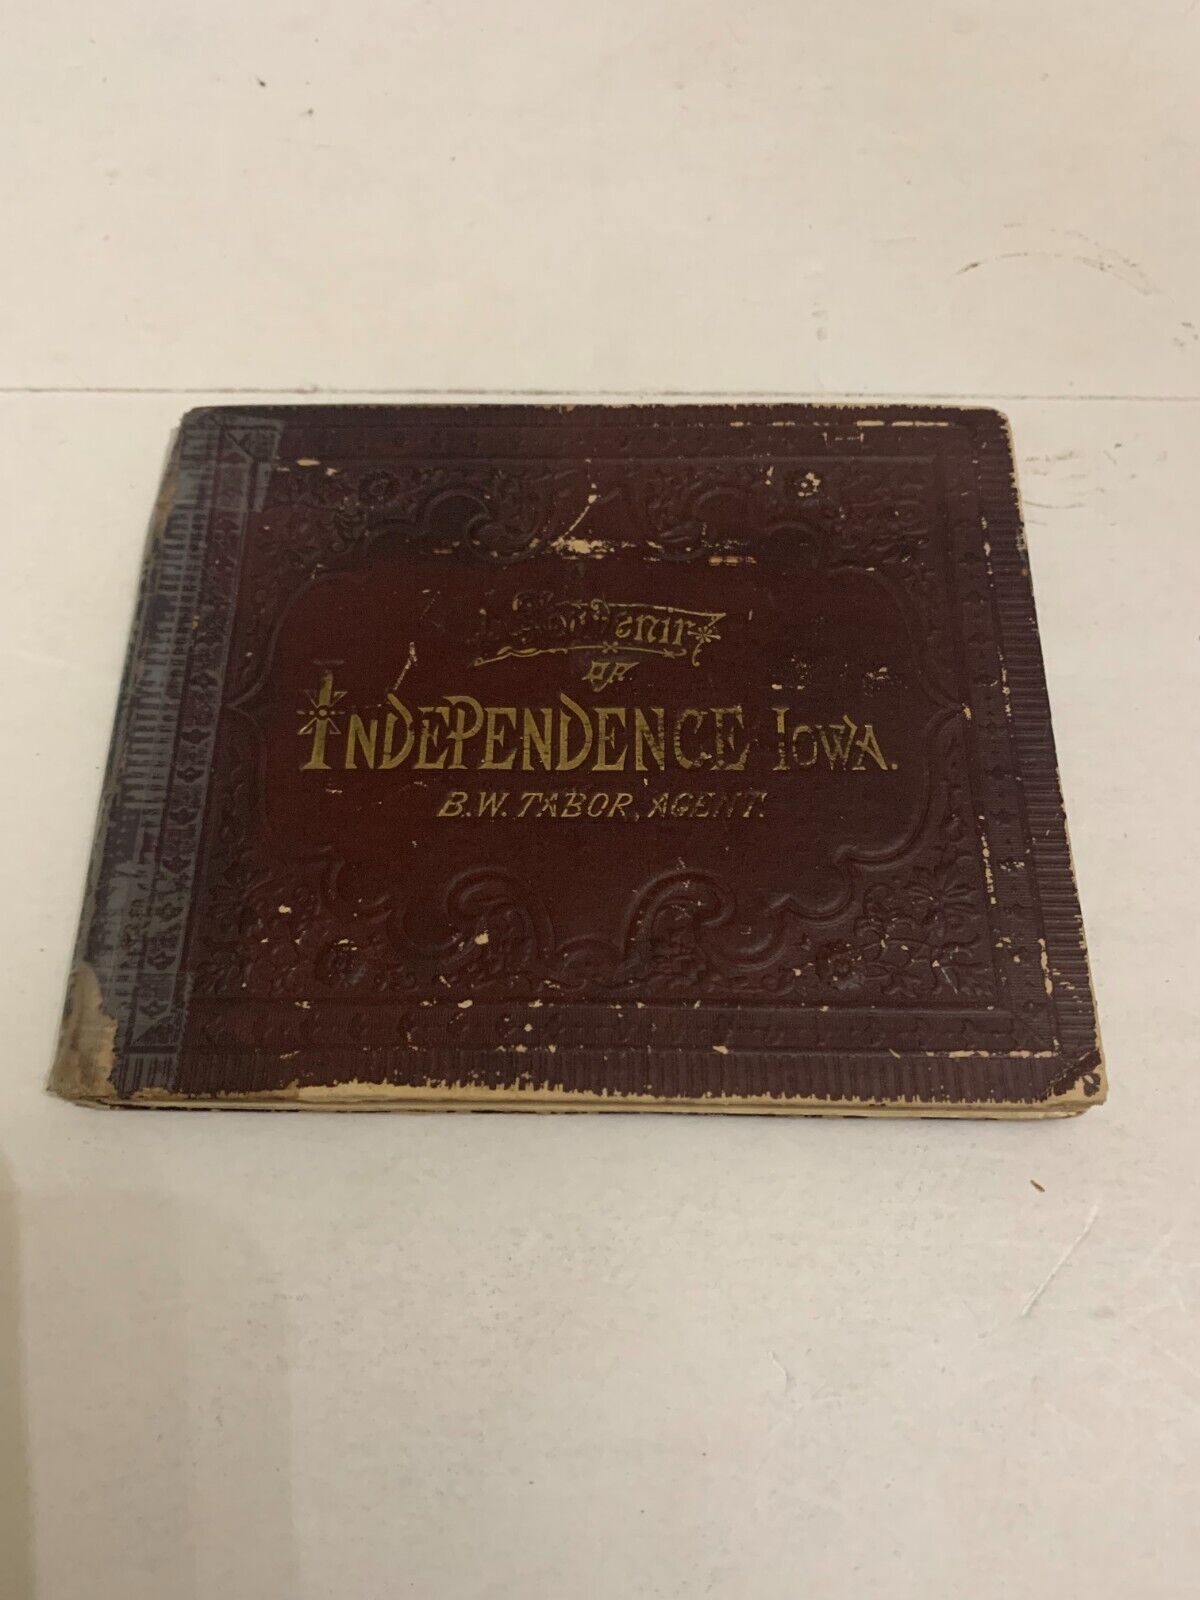 c.1910 Souvenir Of Independence Iowa Fold Out Photo Book by B.W. Tabor Agent